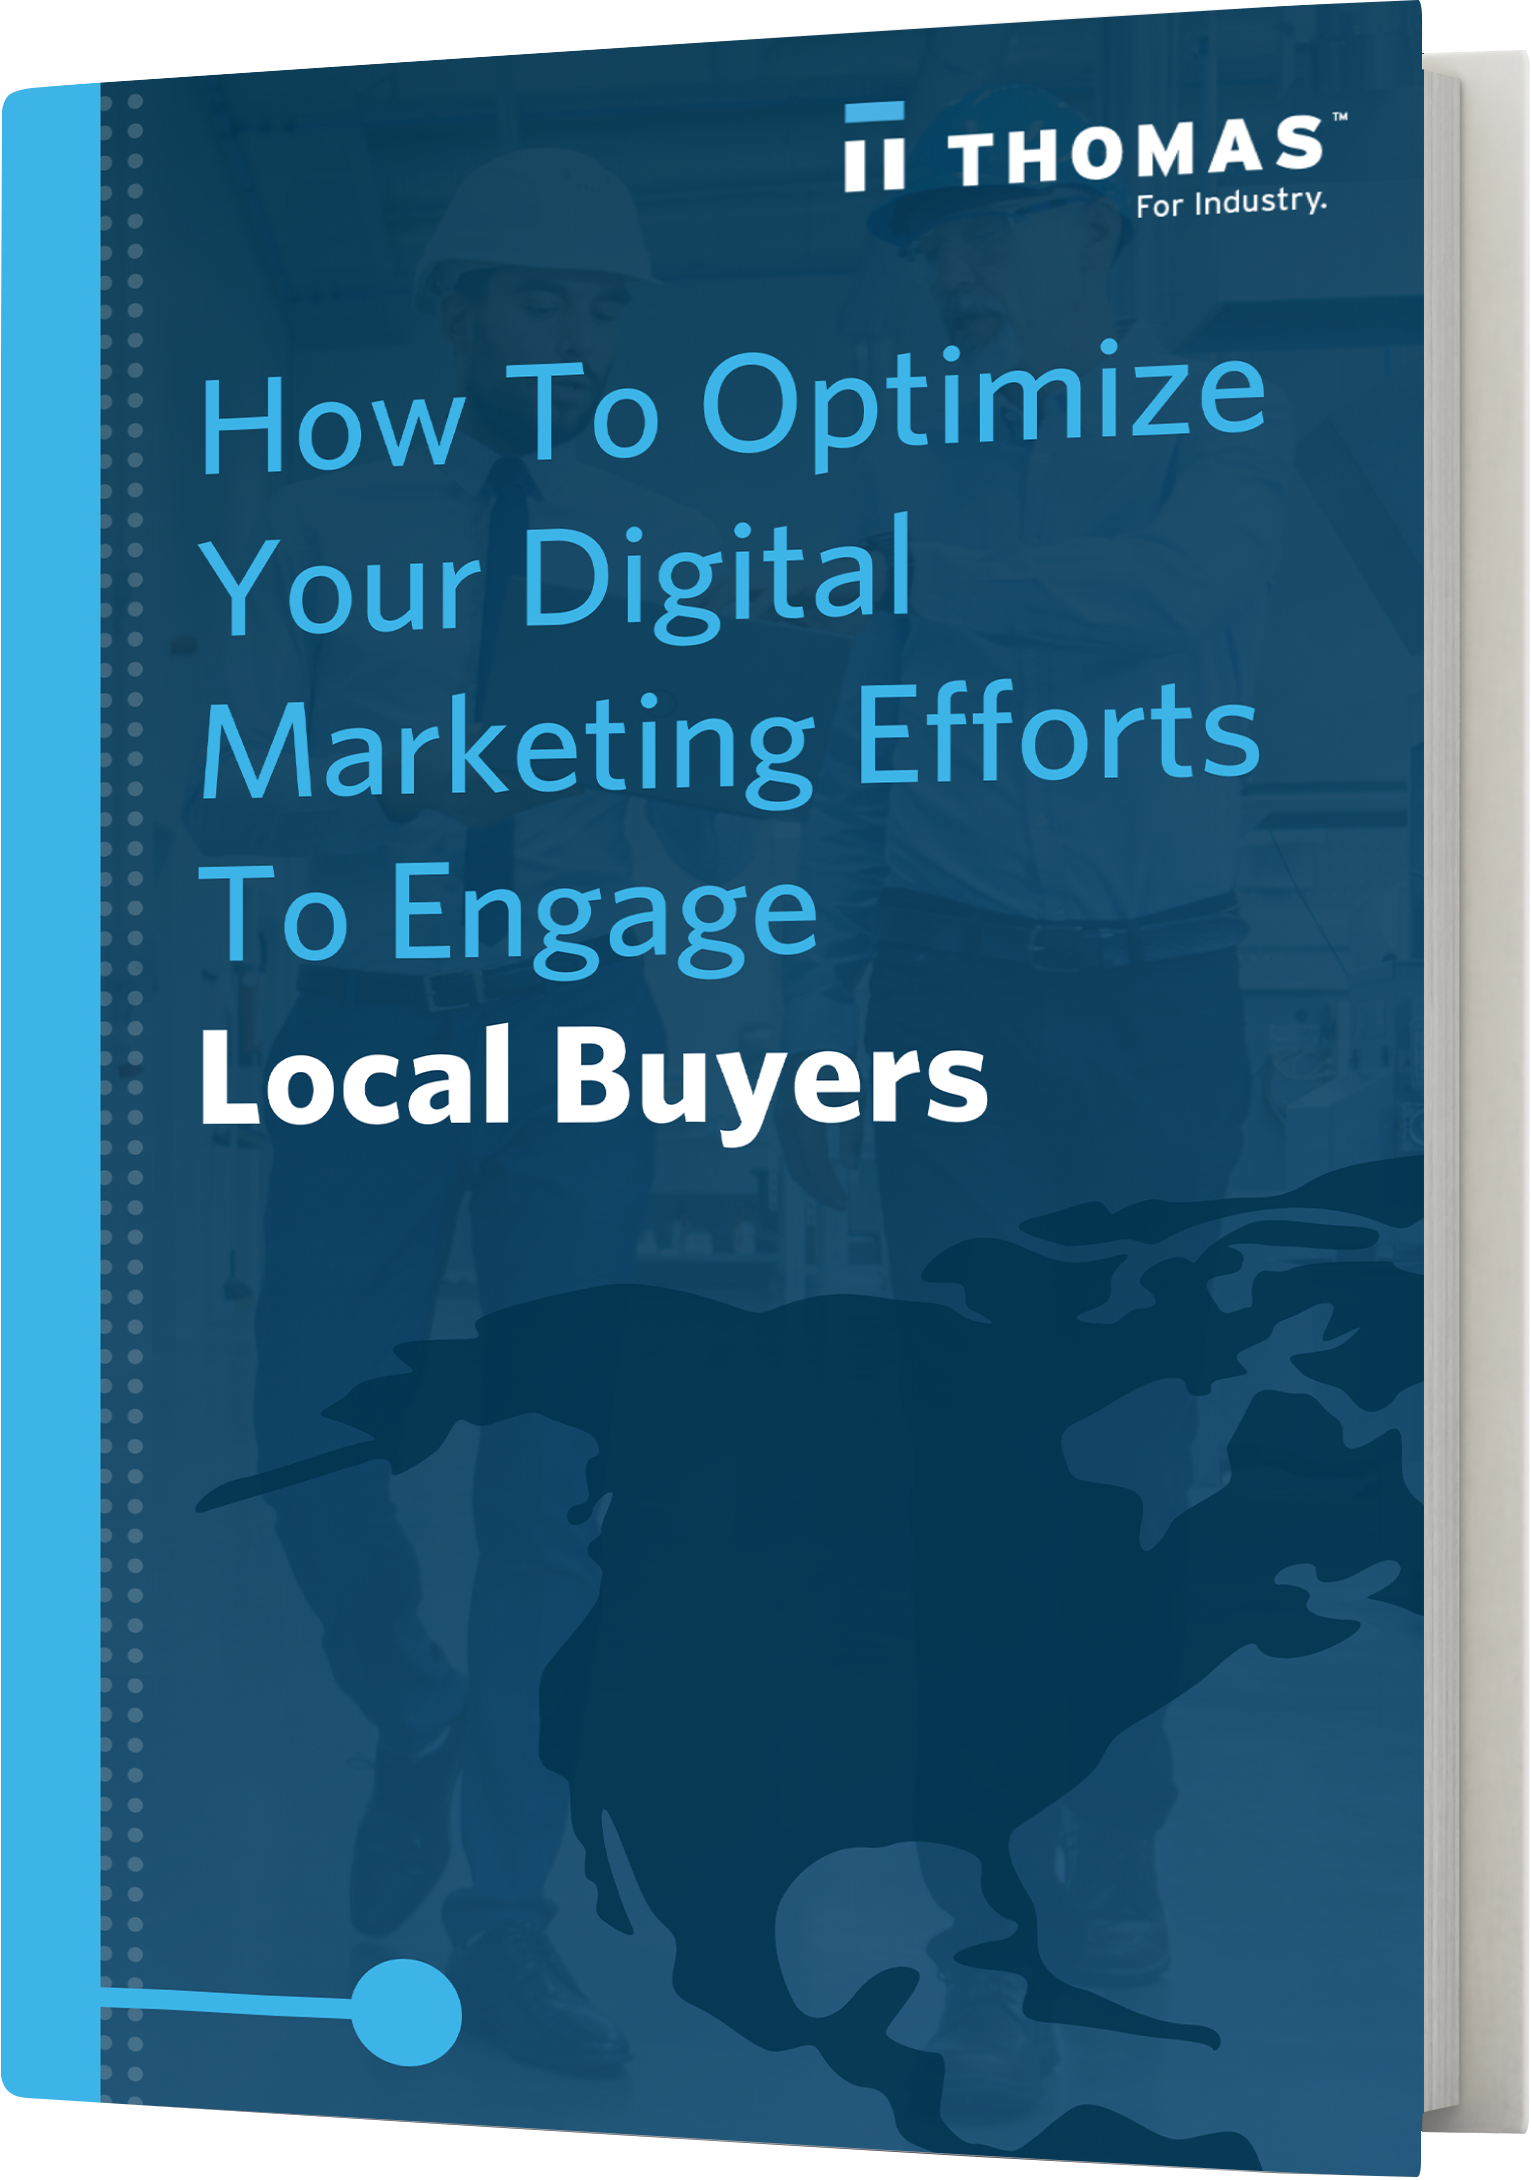 How To Optimize Your Digital Marketing Efforts To Engage Local Buyers